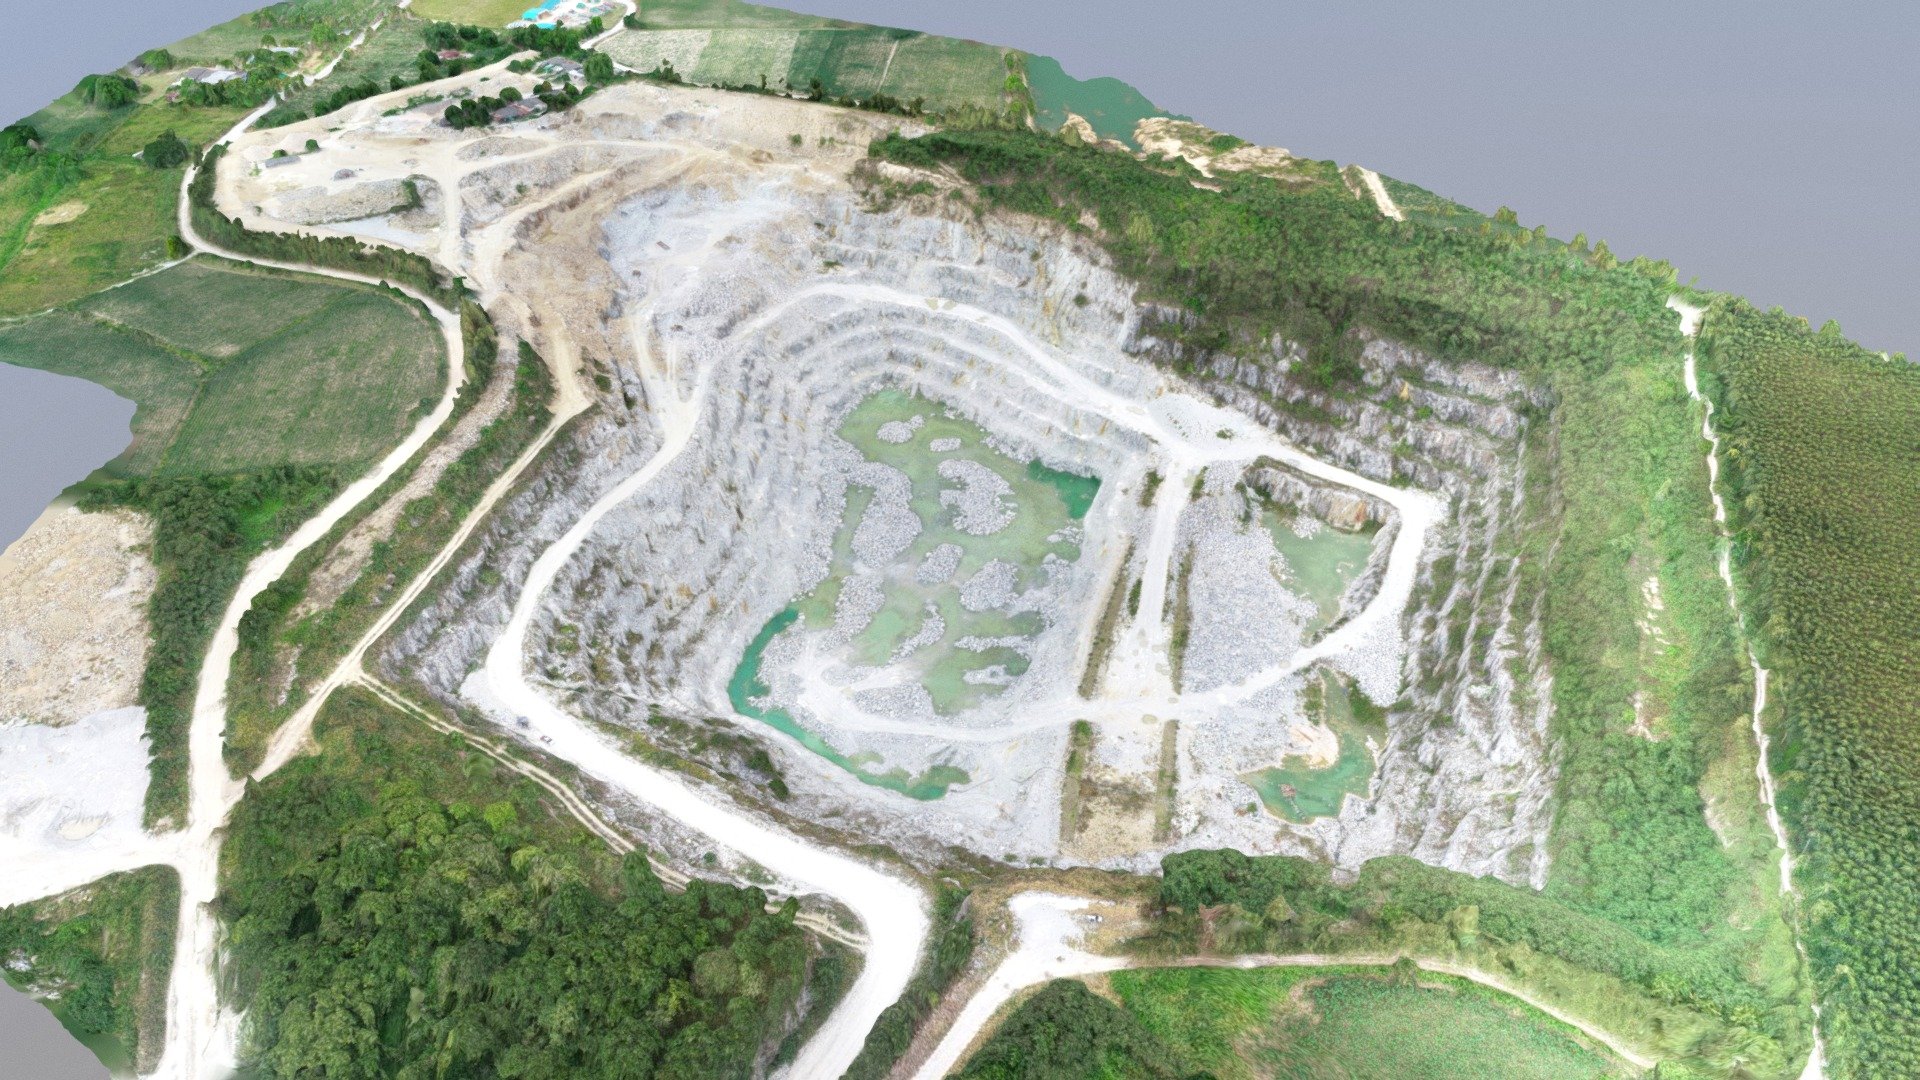 Mining open pit for aggregate production to support construction industry. 

Generated from Drone-Photogrammetry - A quarry - Open-Pit Mining - 3D model by aec_mbi_thailand 3d model